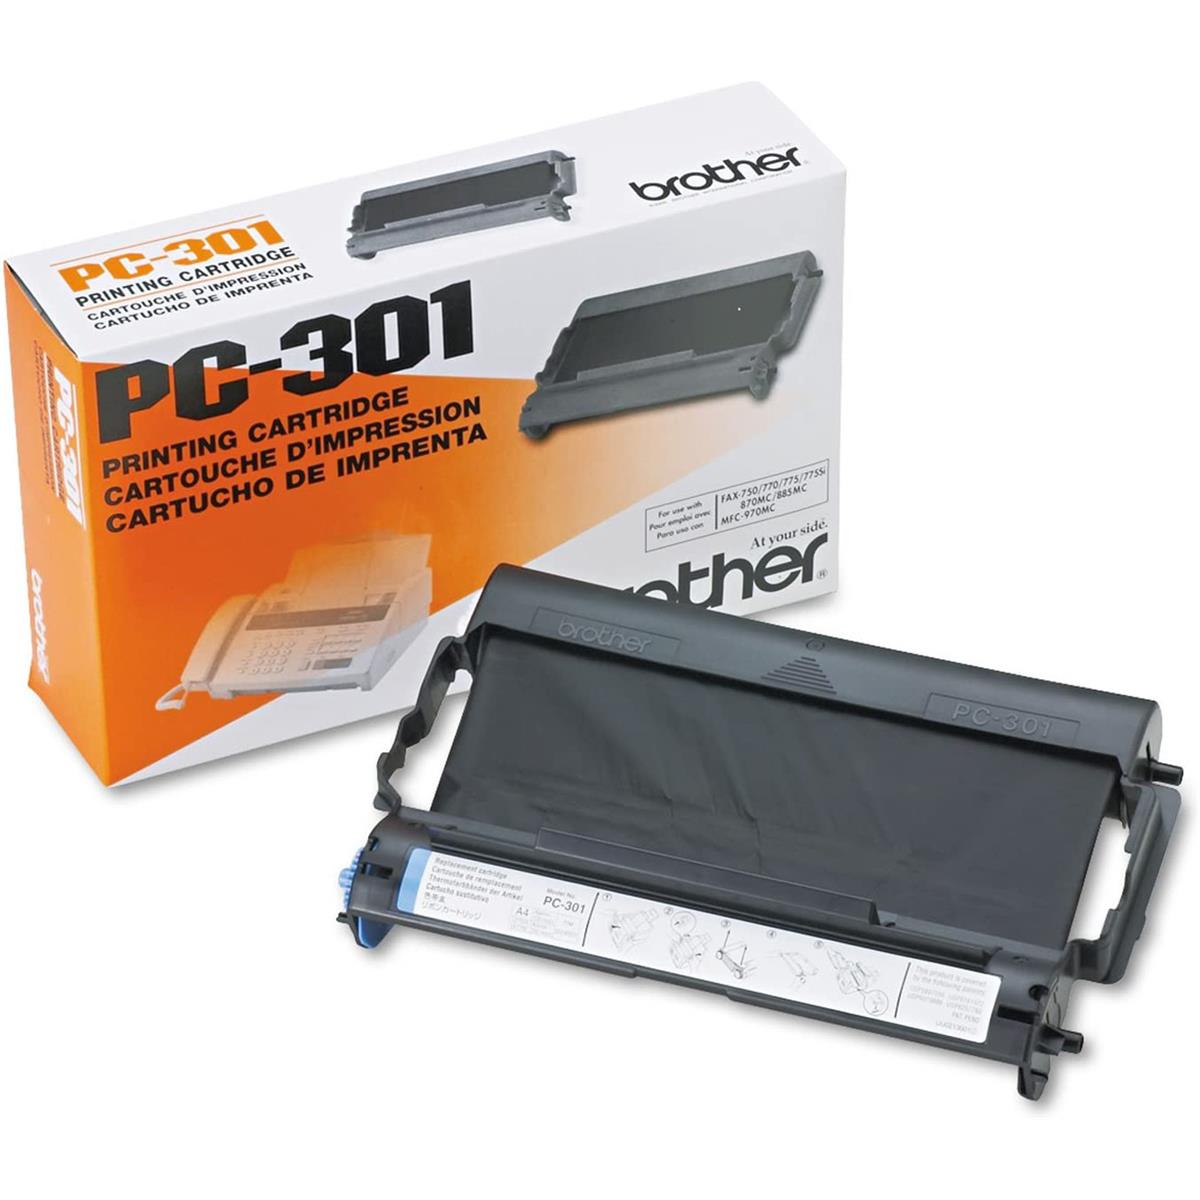 Image of Brother PC-301 Black Toner Cartridge for IntelliFax